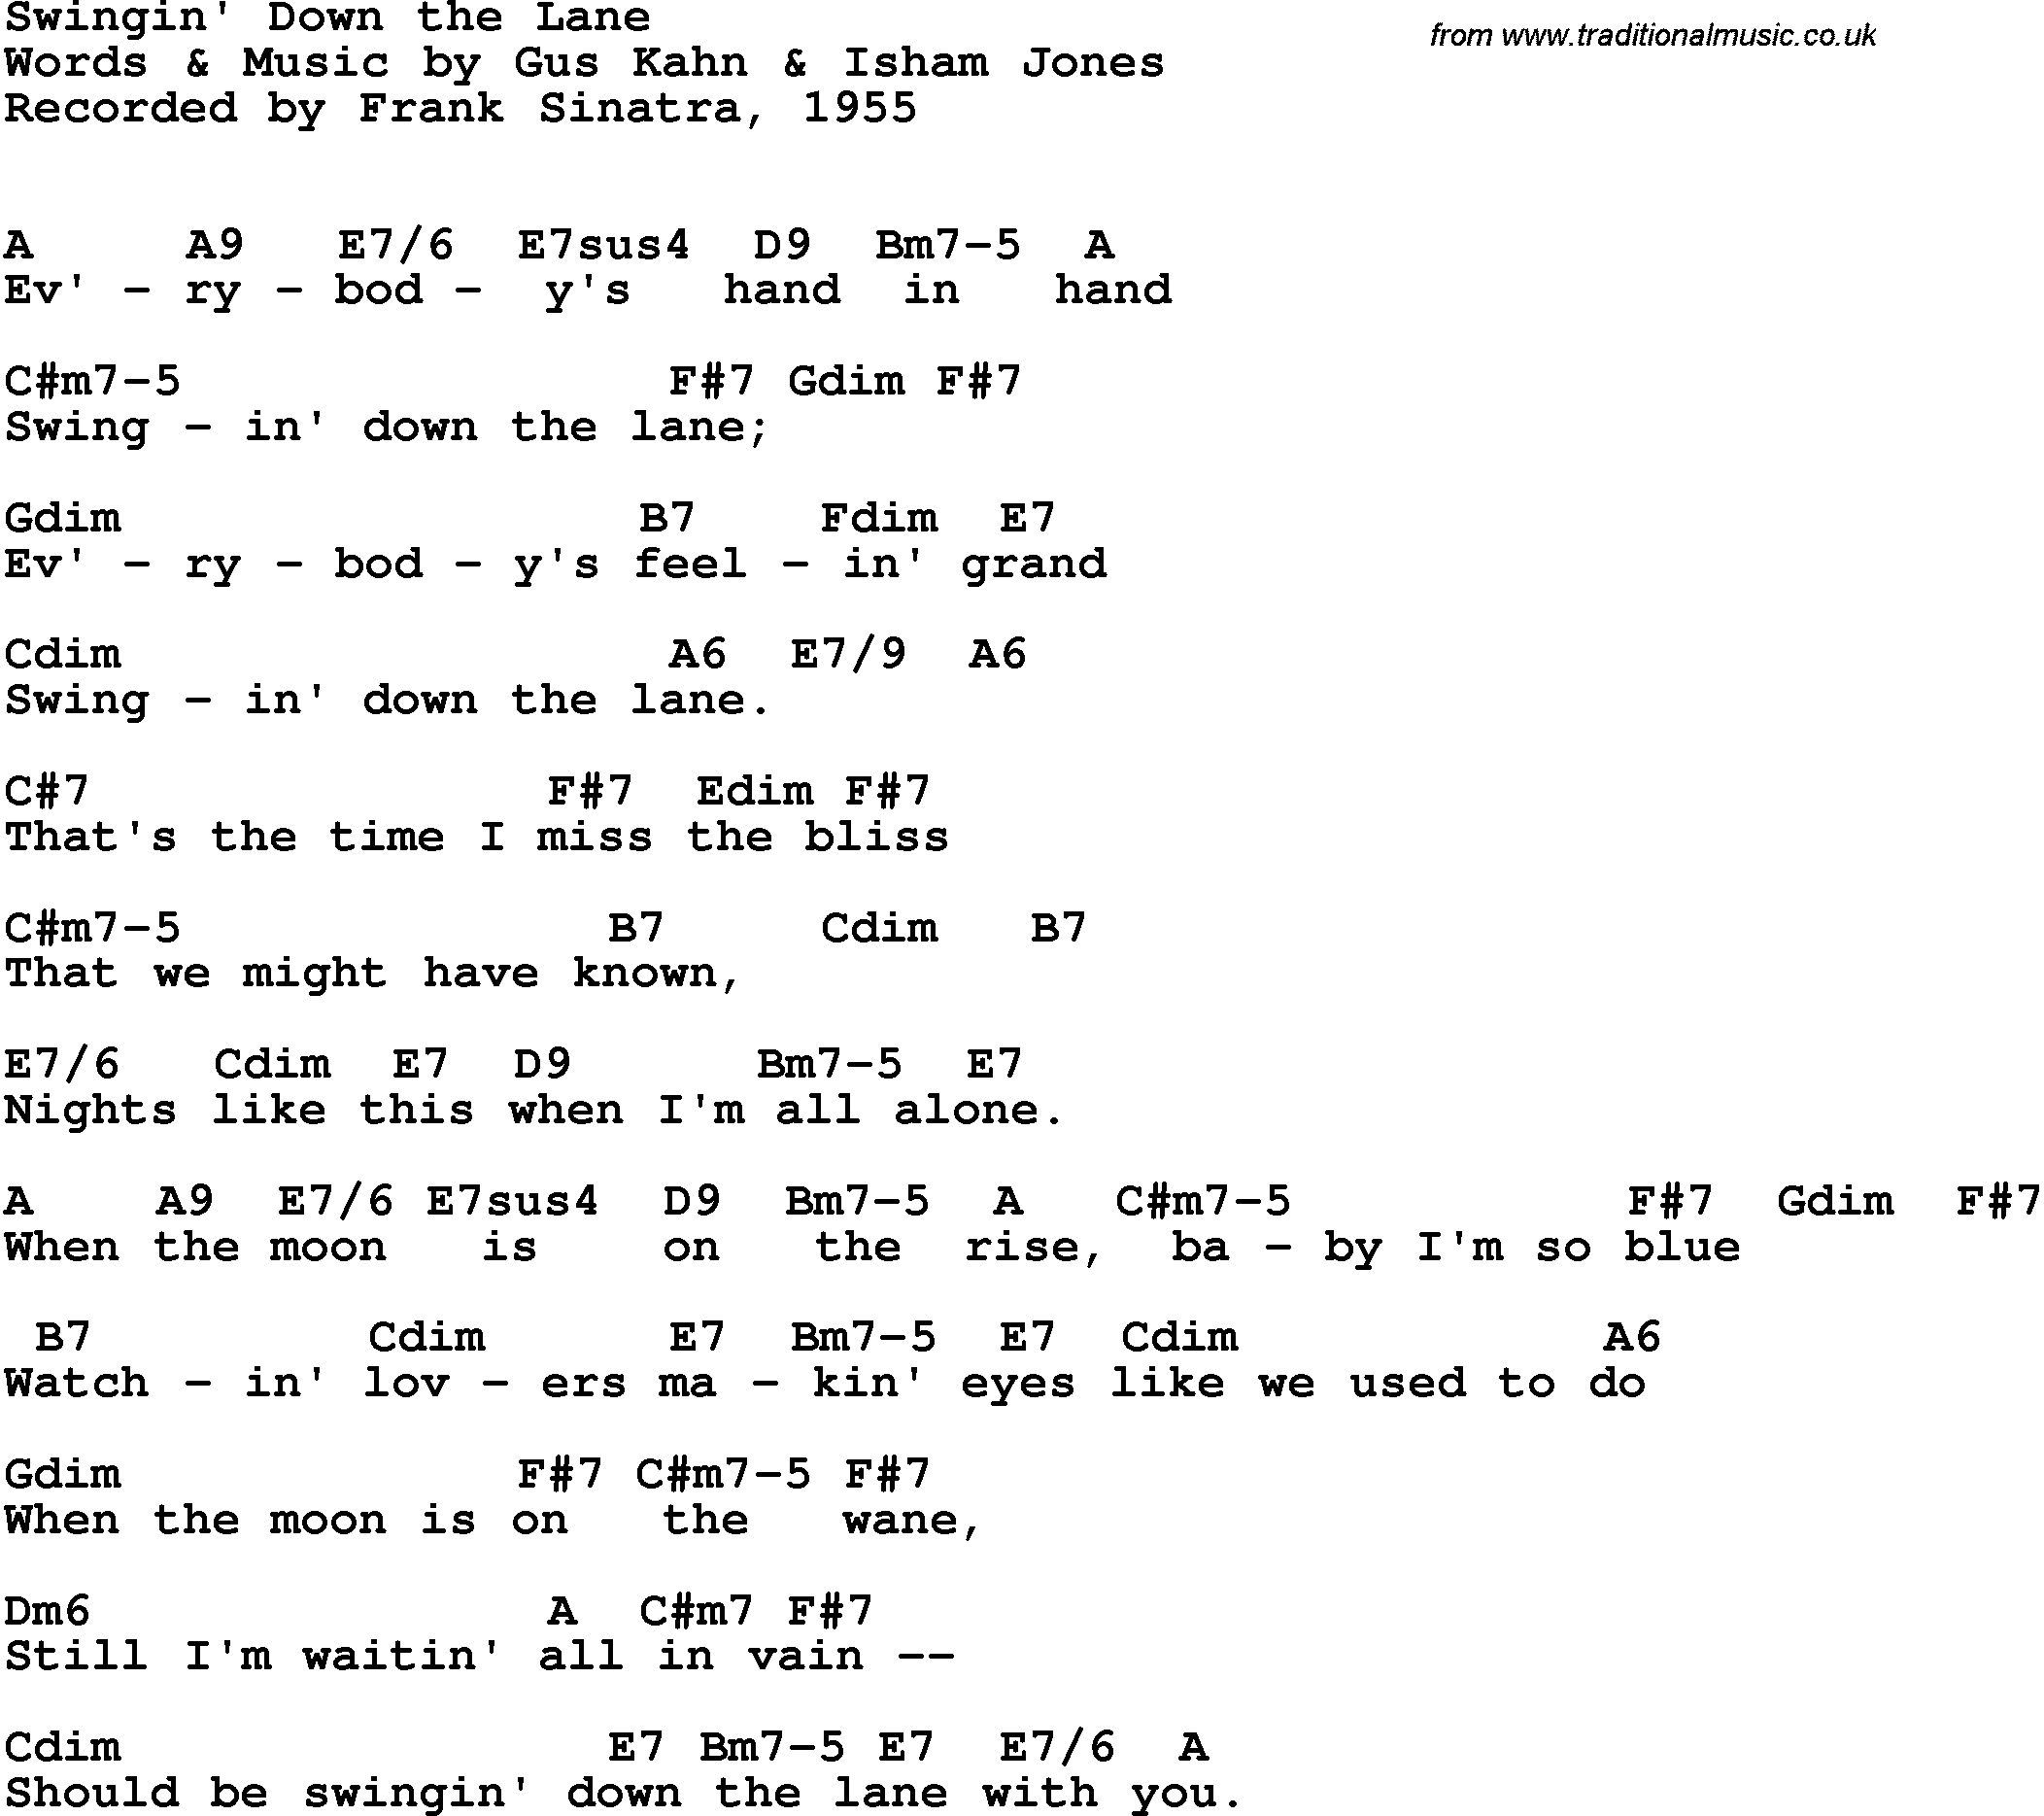 Song Lyrics with guitar chords for Swingin' Down The Lane - Frank Sinatra, 1955